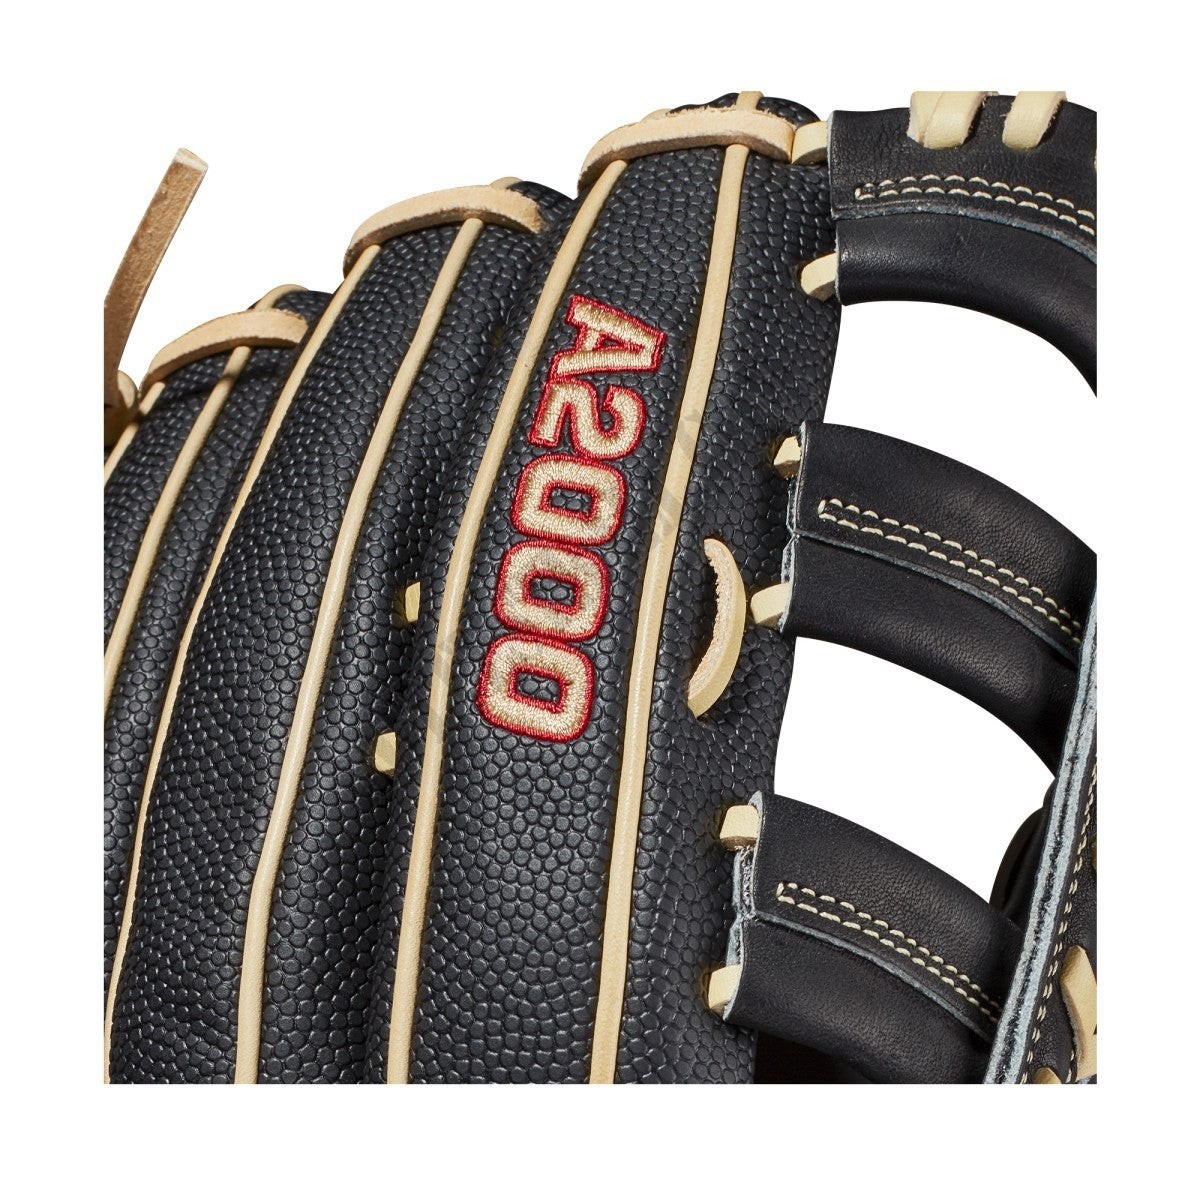 2021 A2000 1800SS 12.75" Outfield Baseball Glove ● Wilson Promotions - -6